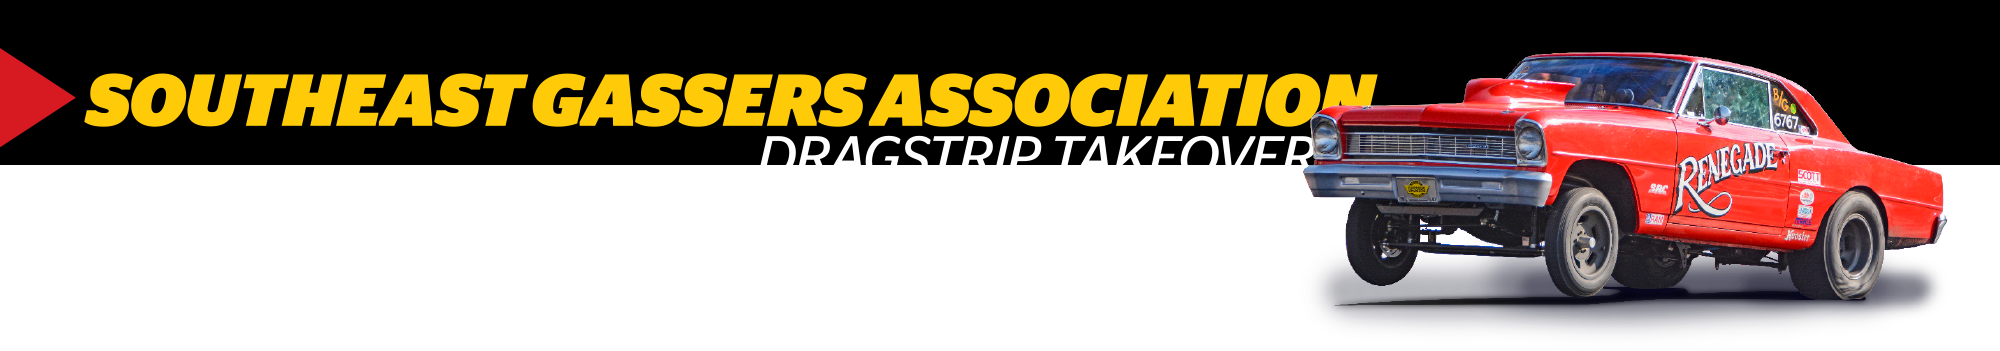 Southeast Gassers Association Dragstrip Takeover